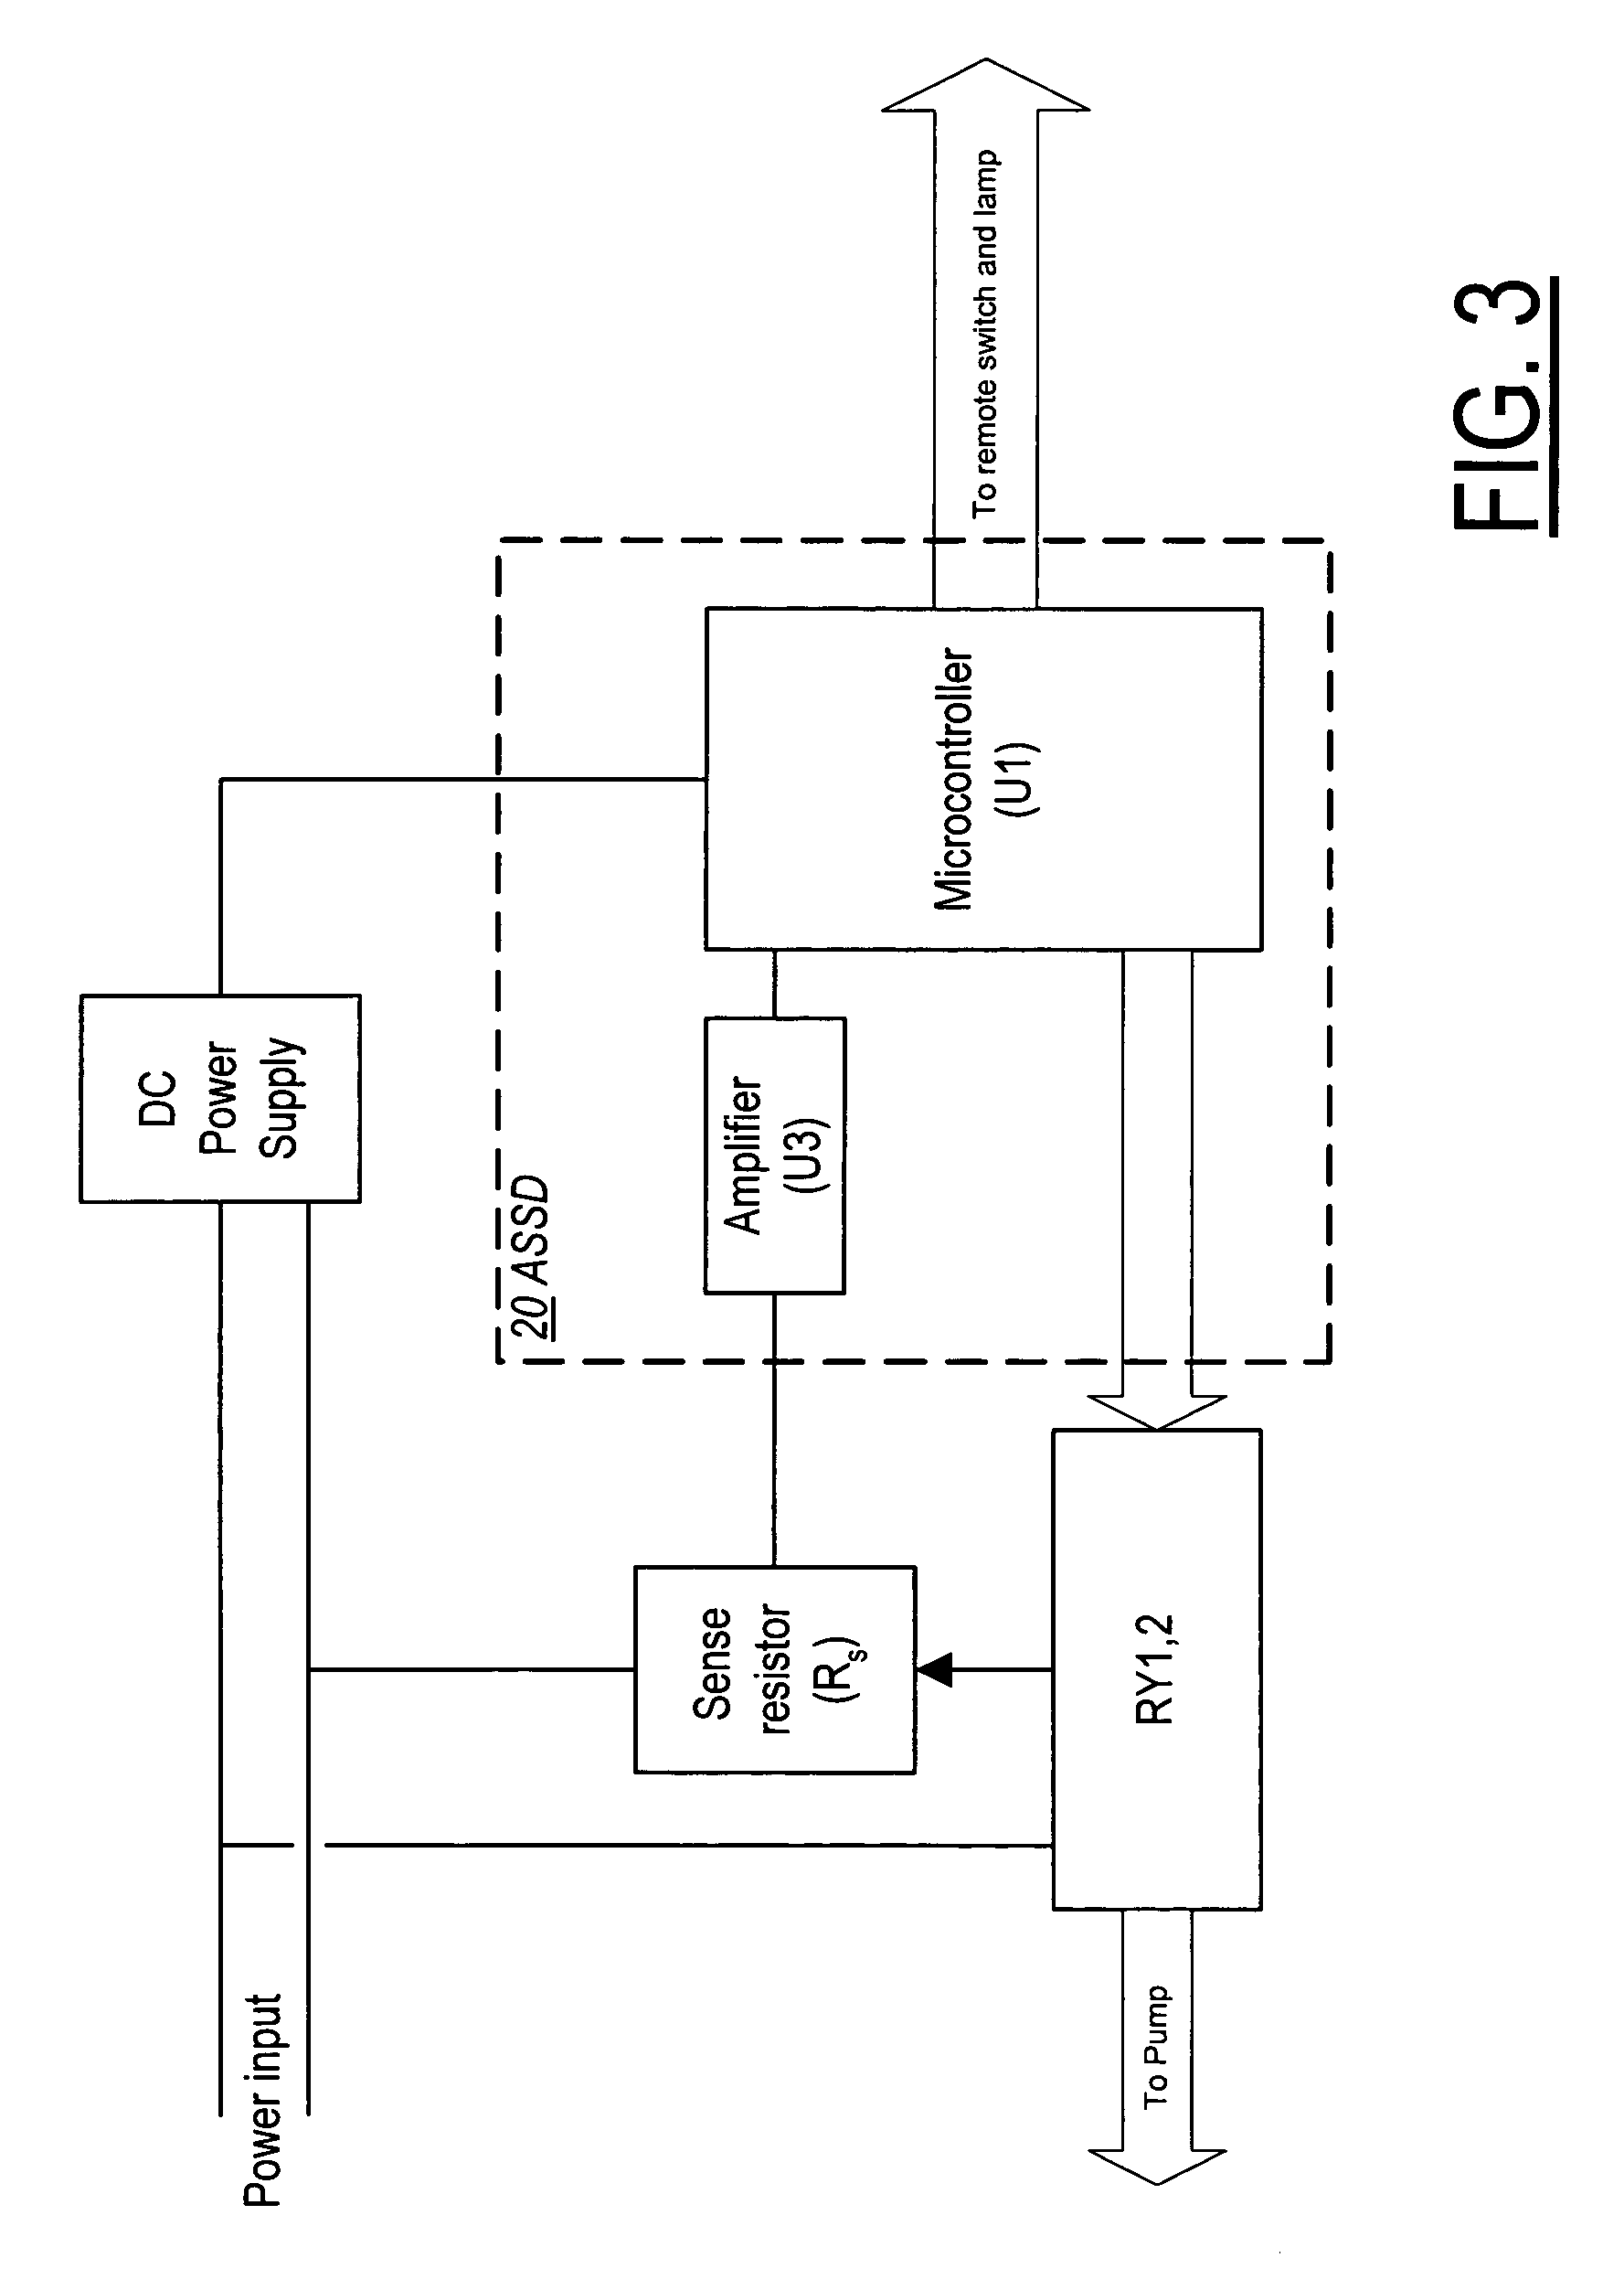 Active sensing and switching device